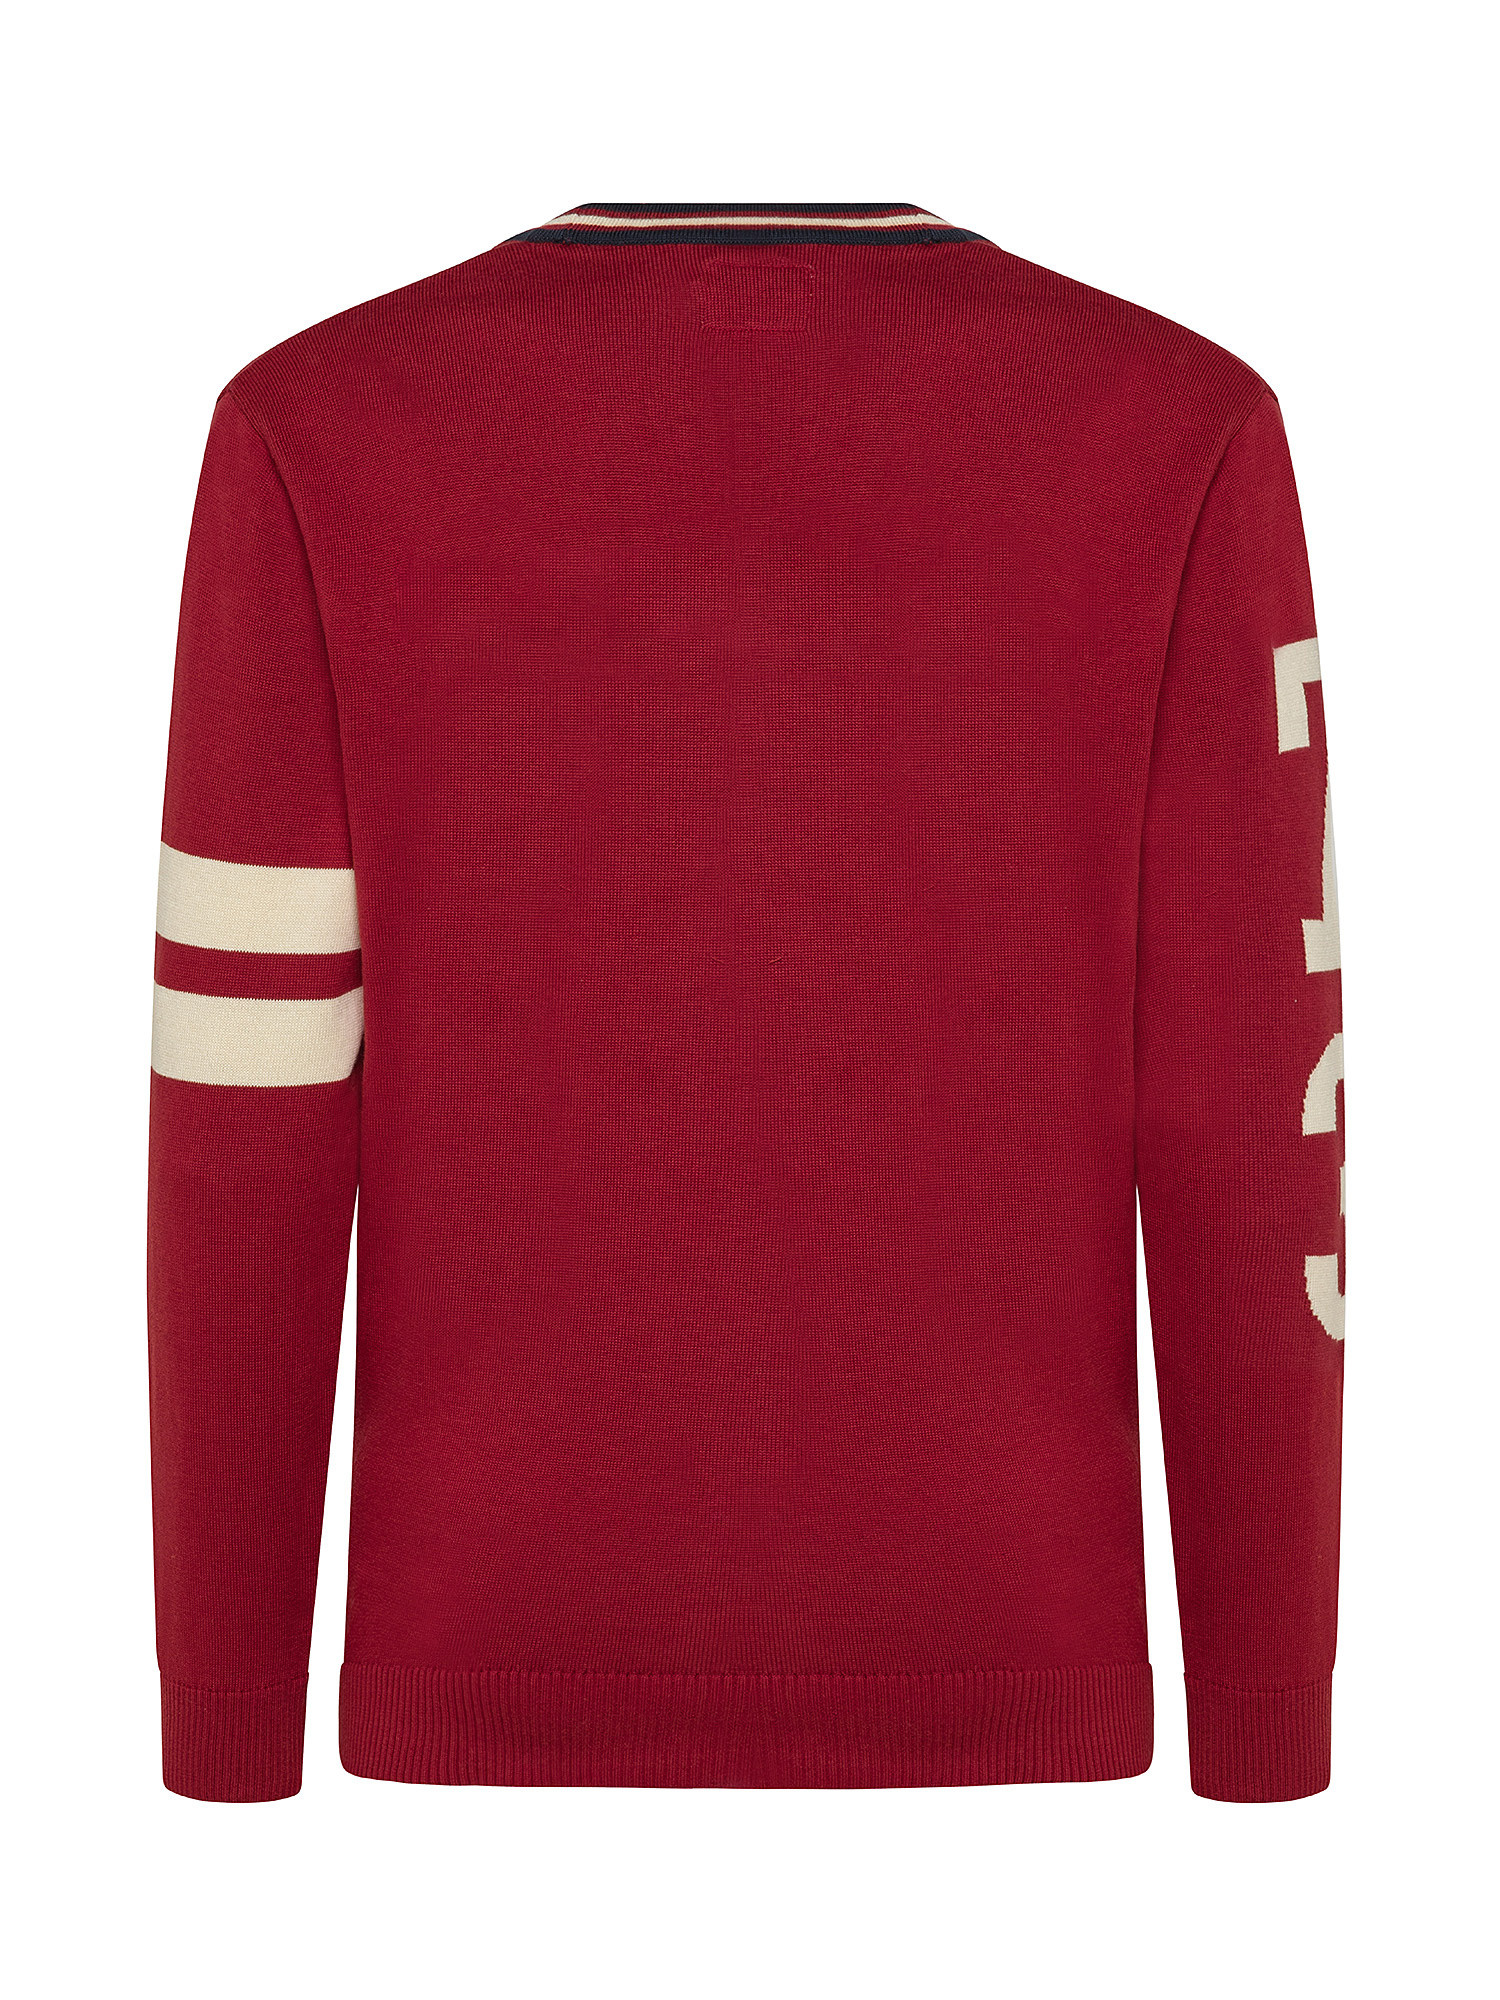 Cardigan in maglia, Rosso mattone, large image number 1